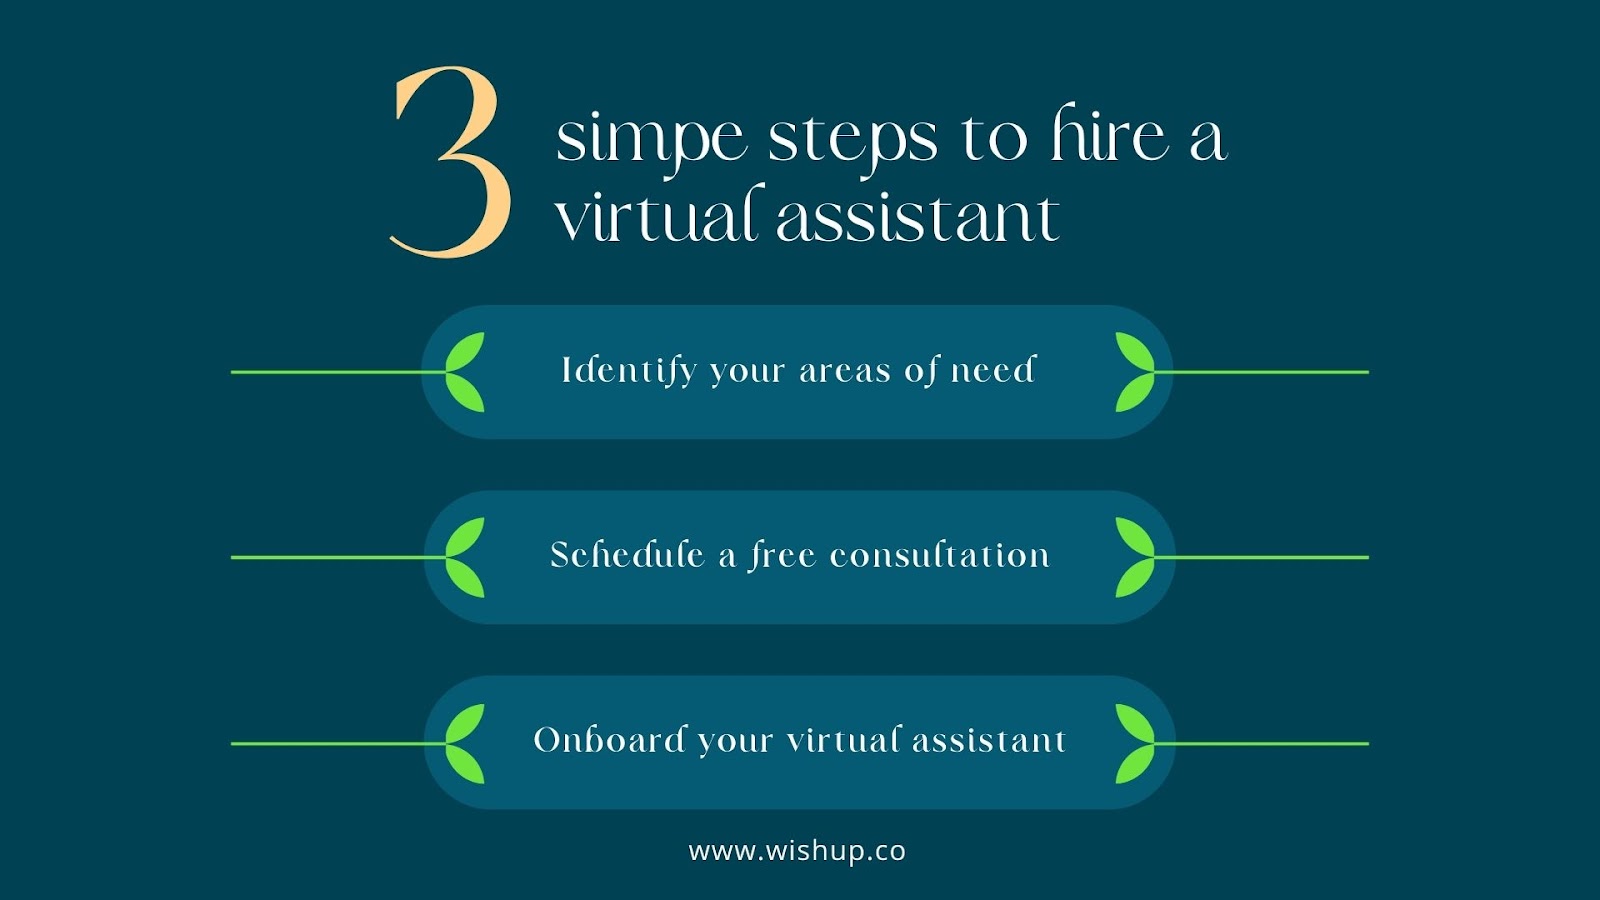 Infographic on how to hire a virtual assistant
1. identify areas of need
2. schedule a free consultation
3. onboard your virtual assistant